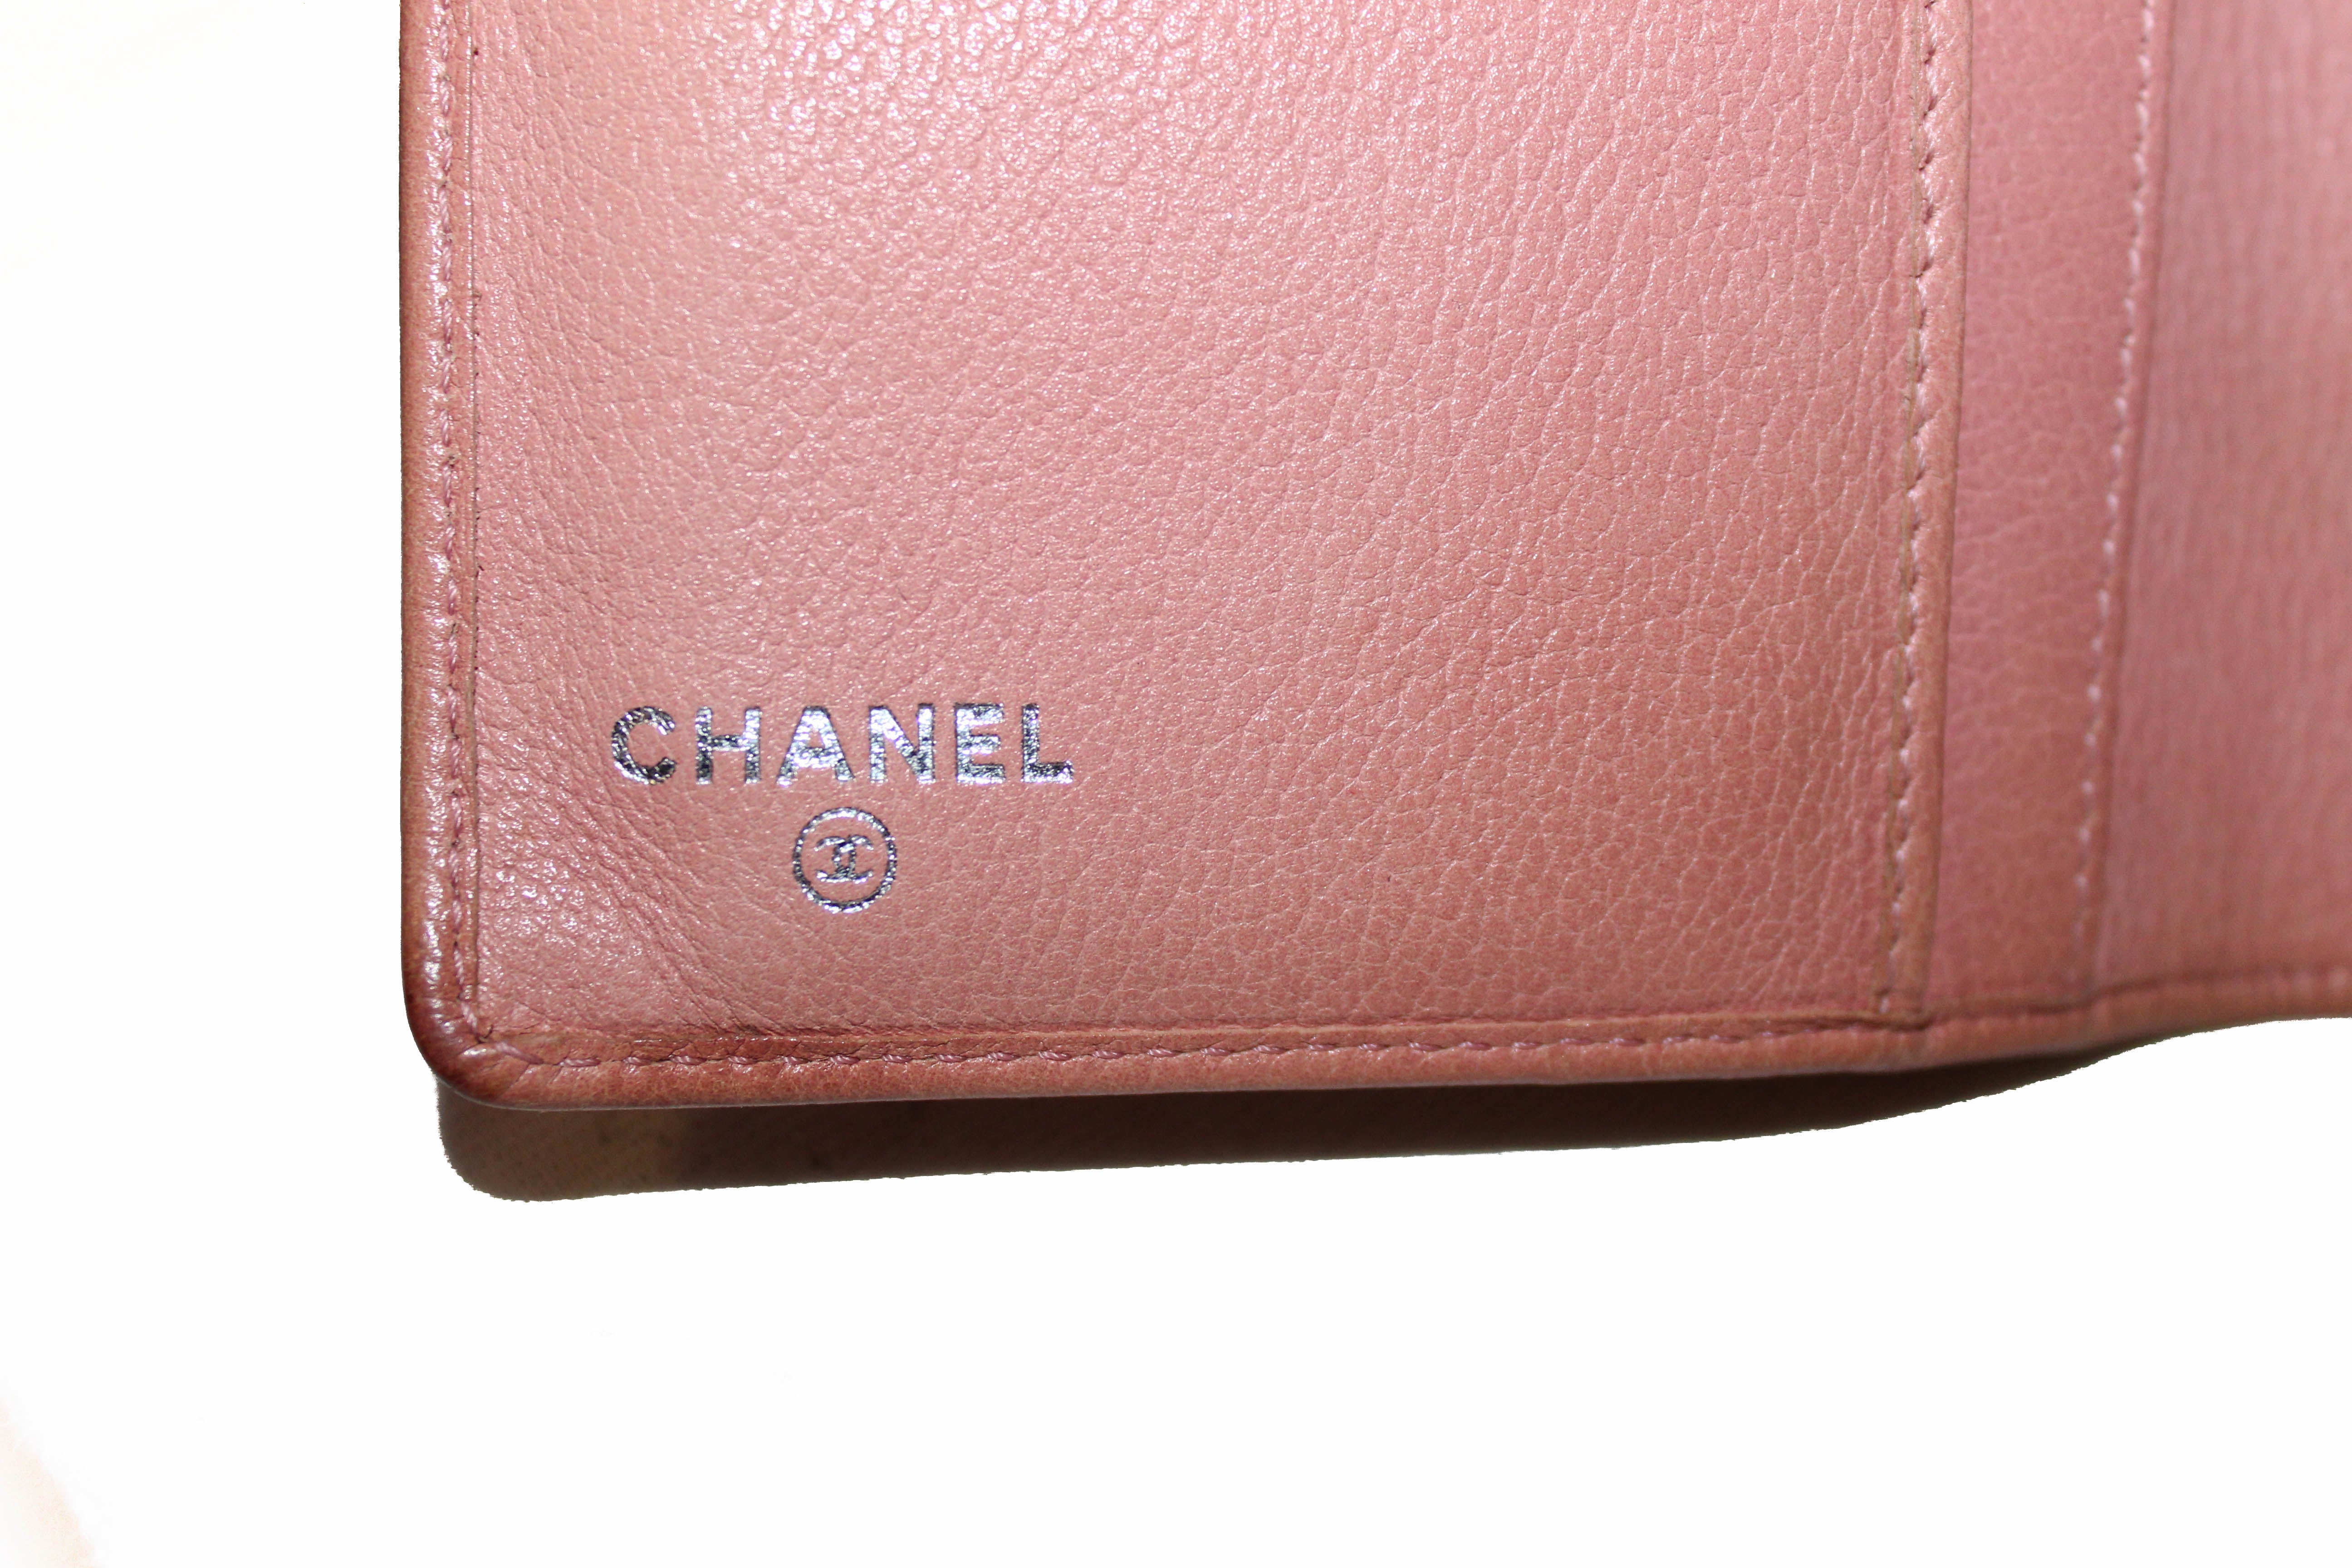 Authentic Chanel Pink Calfskin Leather Flap Camellia Wallet